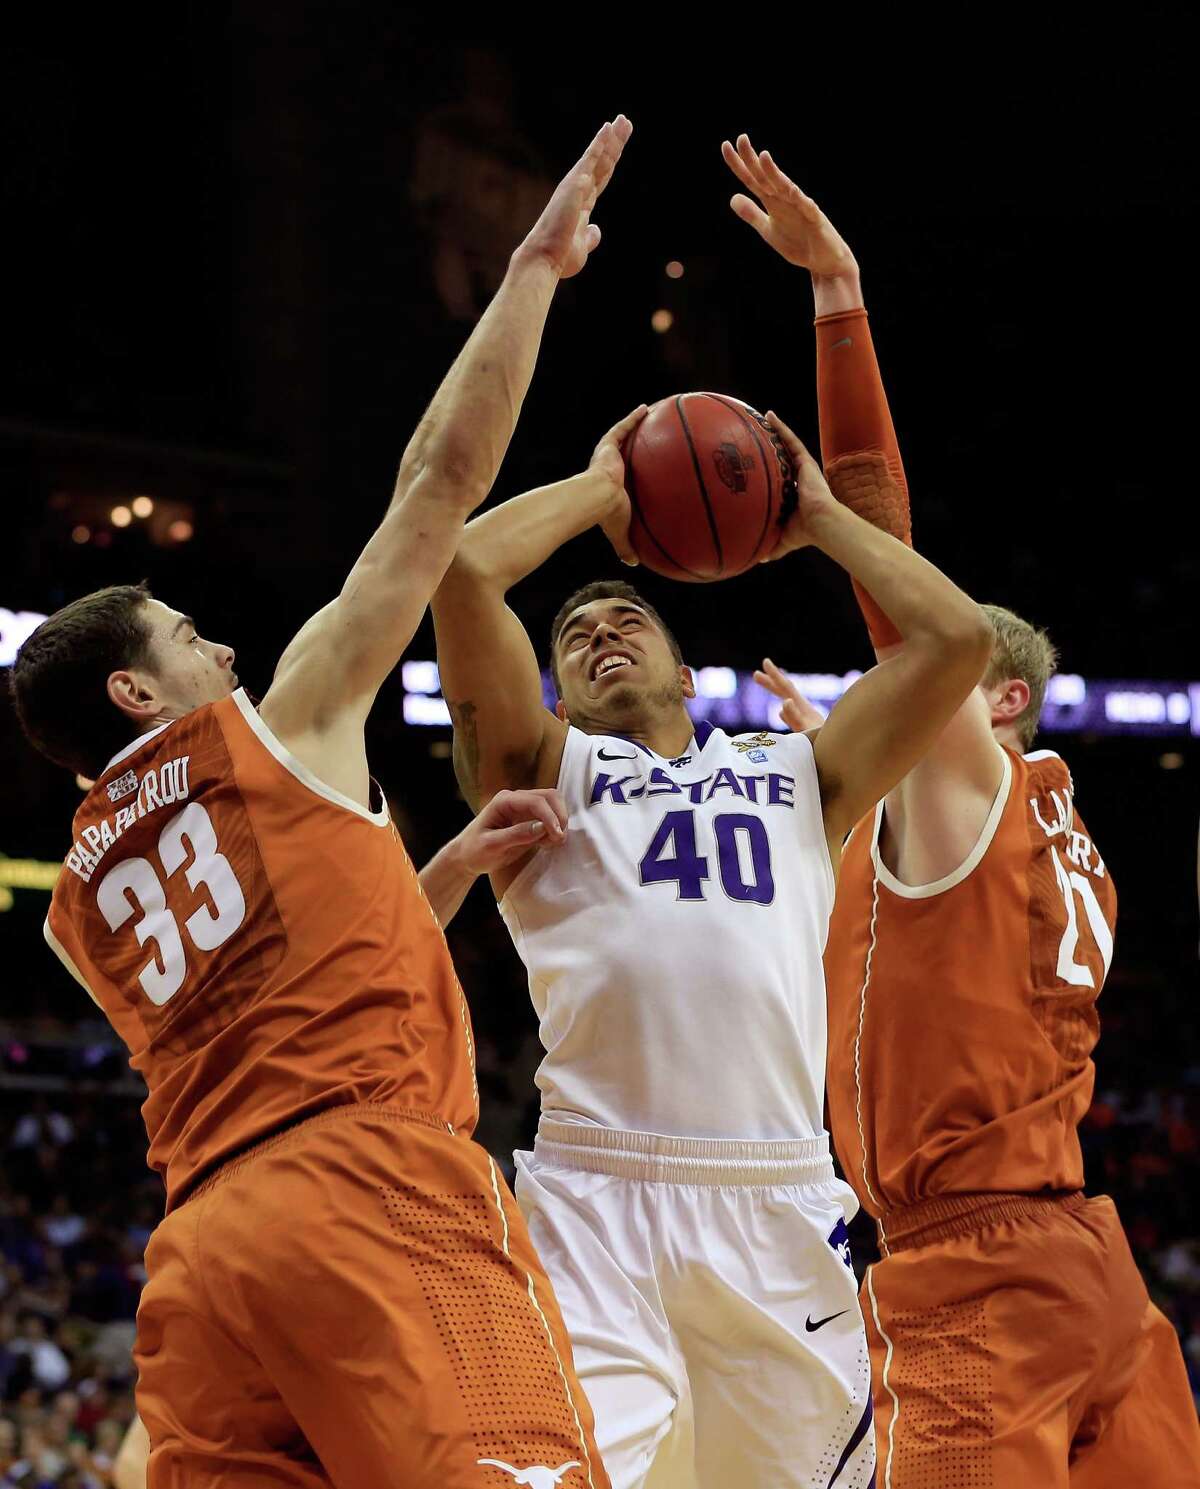 The Longhorns were no match for the Willdcats as K-State handled UT easily.